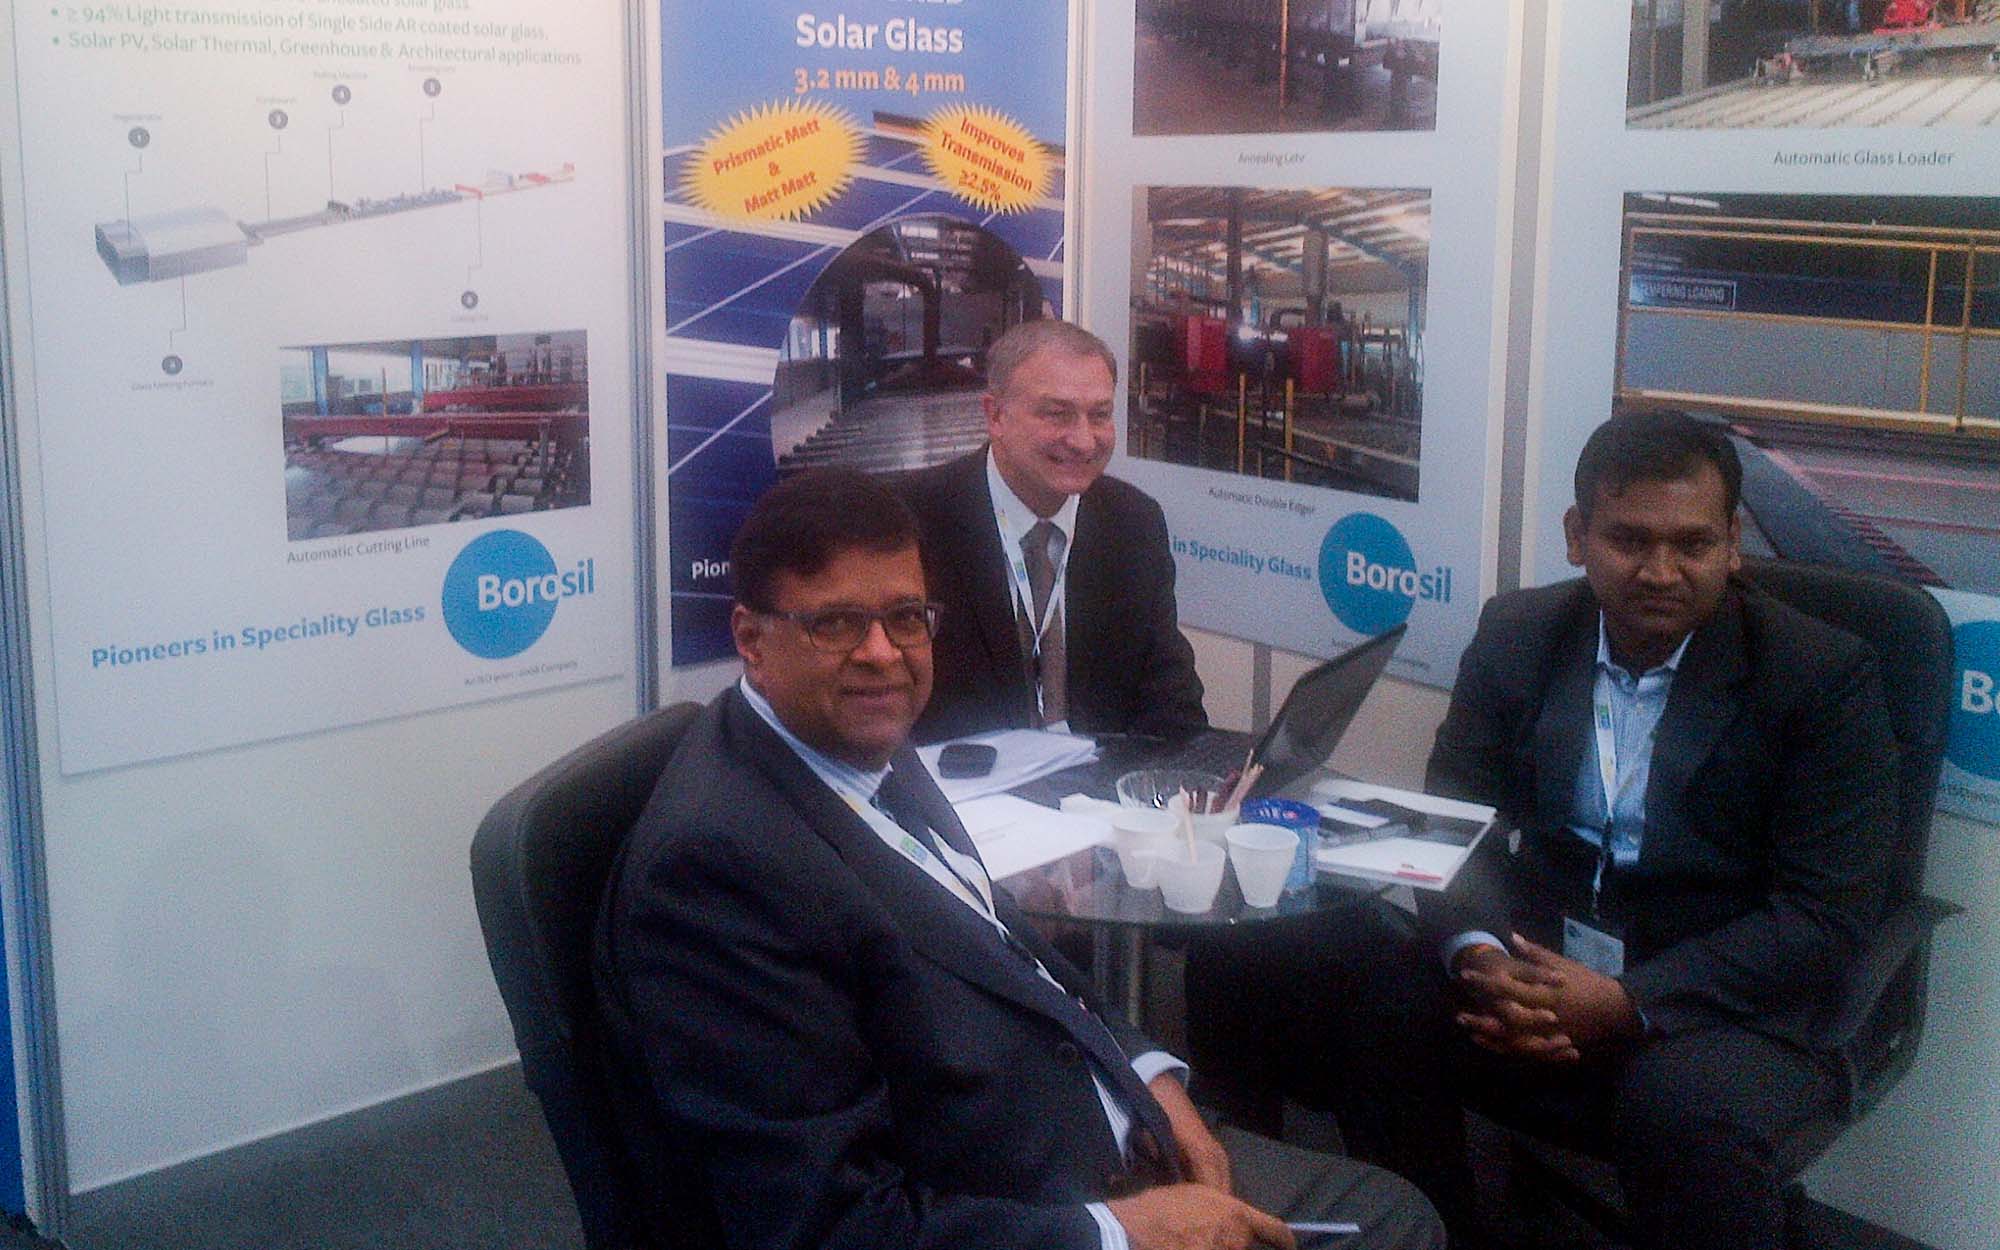 Meeting at a solar exhibition in 2014.